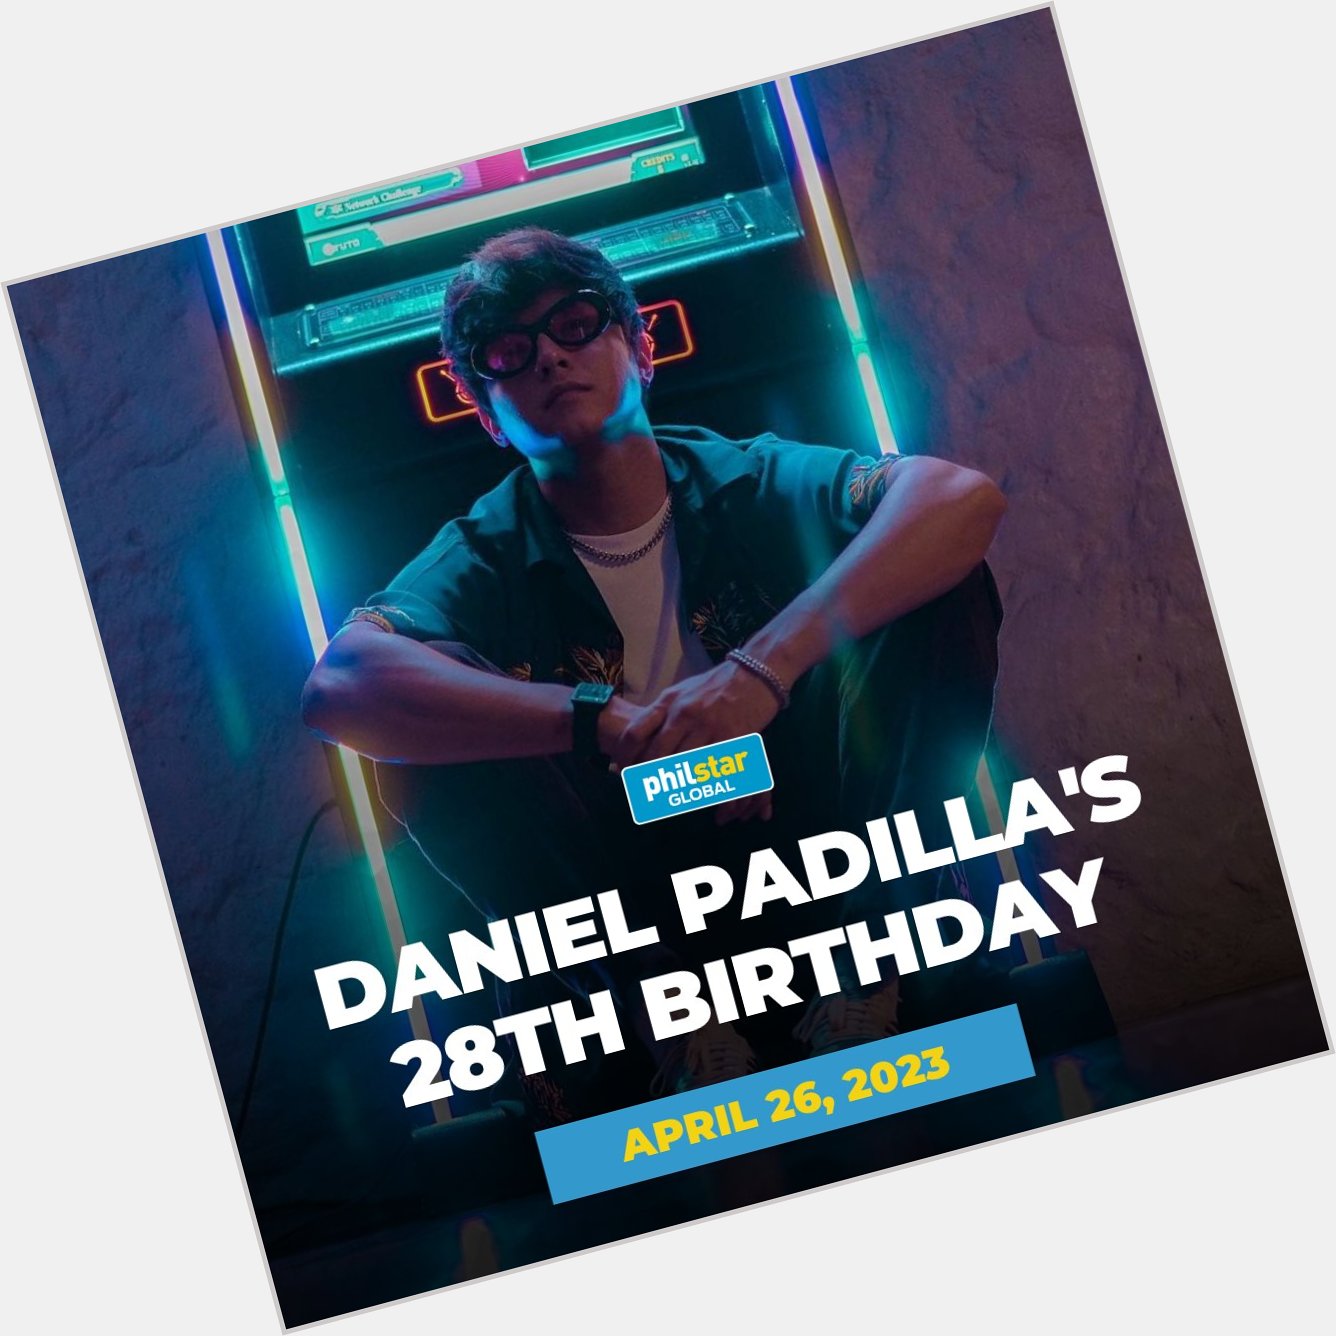 HAPPY BIRTHDAY, DJ! Daniel Padilla turns 28 today. What is your birthday wish to the actor? 